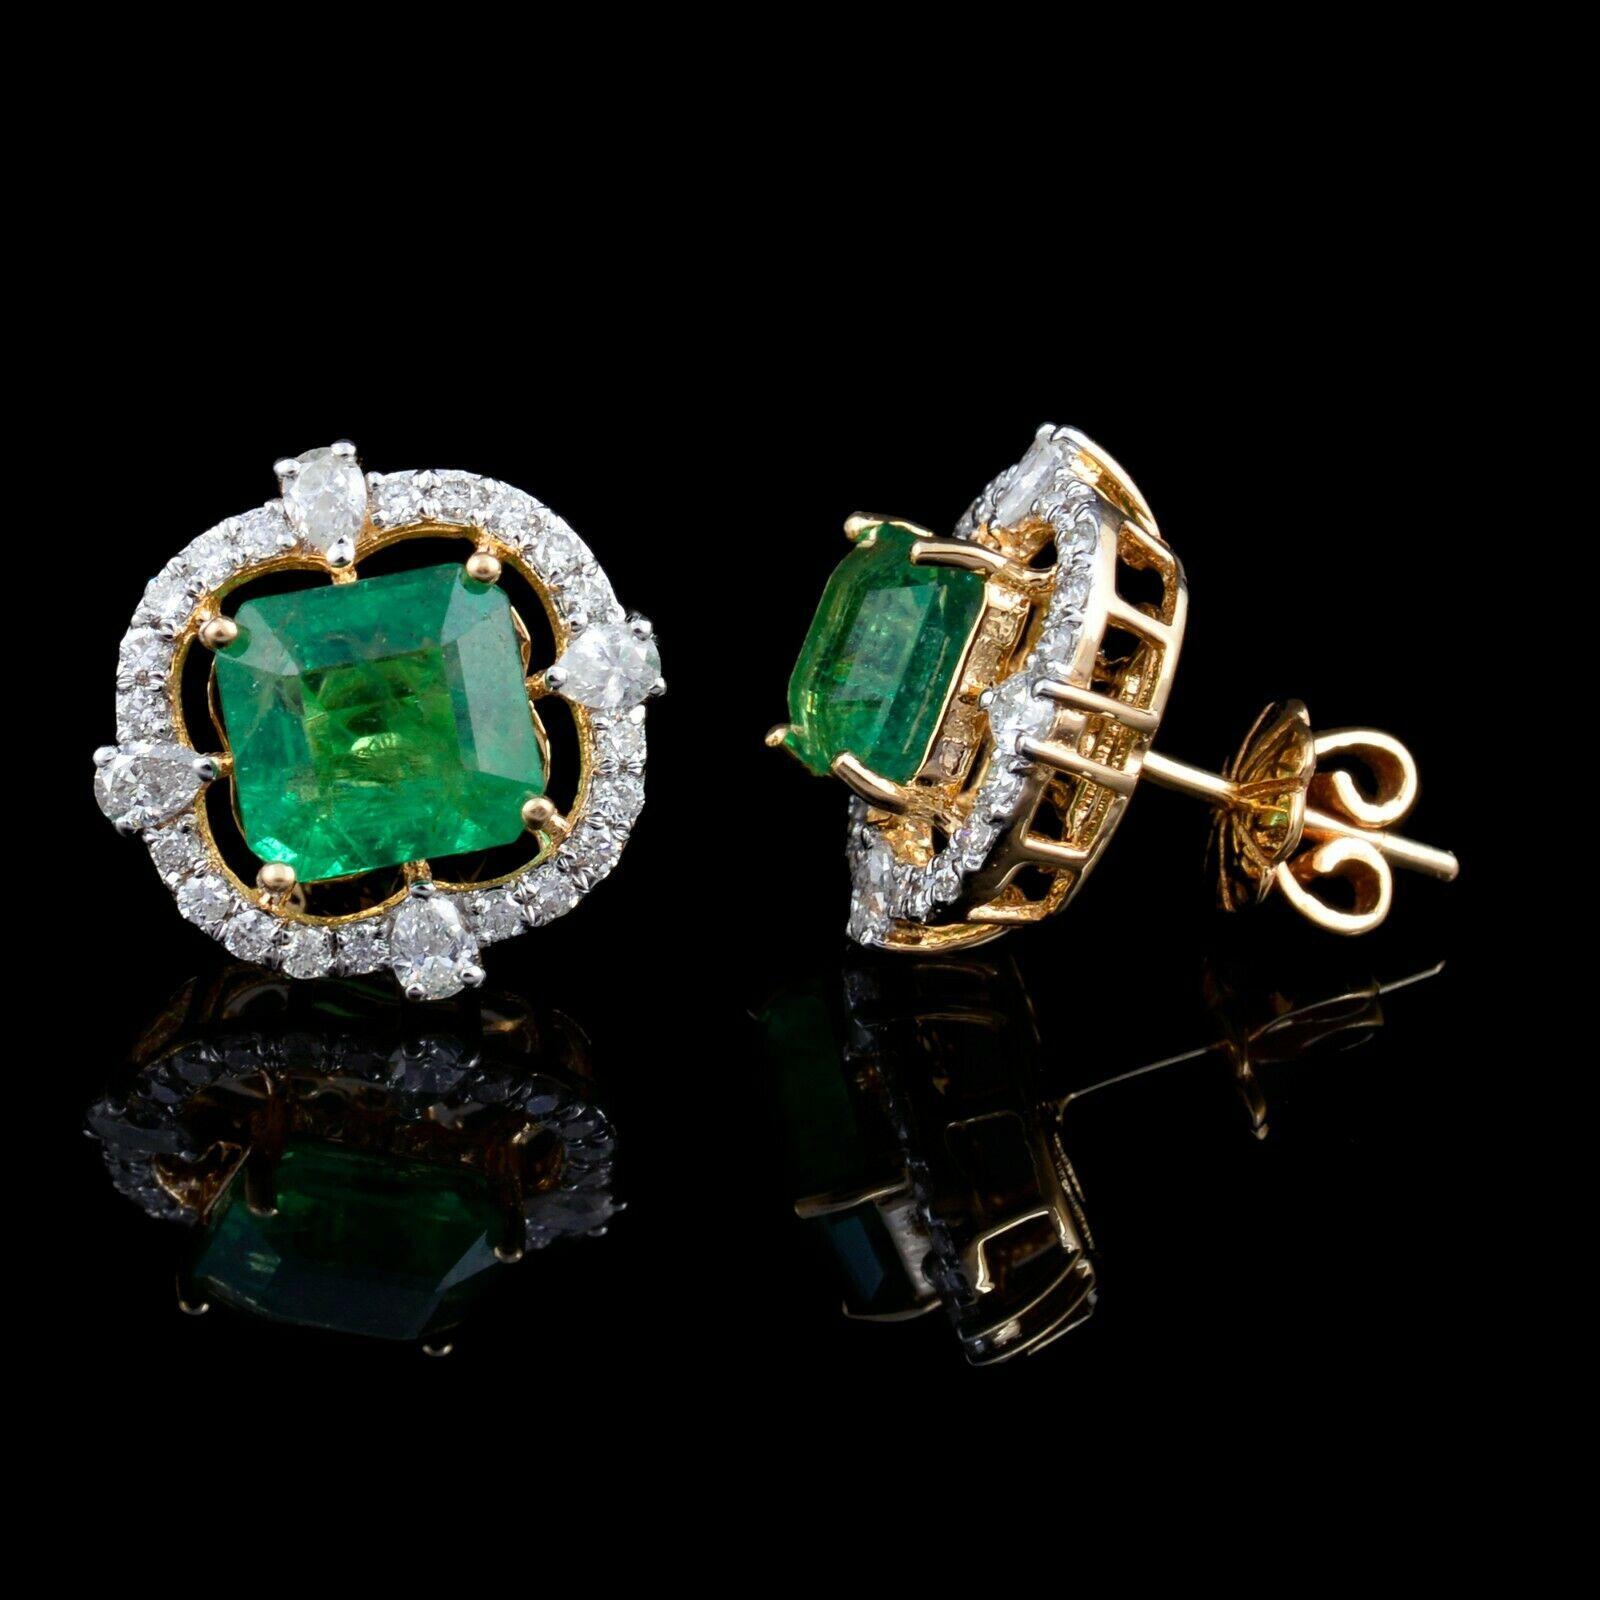 Cast in 14 karat gold, these stunning stud earrings are hand set with 4.60 carats emerald and 1.20 carats of glimmering diamonds. 

FOLLOW MEGHNA JEWELS storefront to view the latest collection & exclusive pieces. Meghna Jewels is proudly rated as a